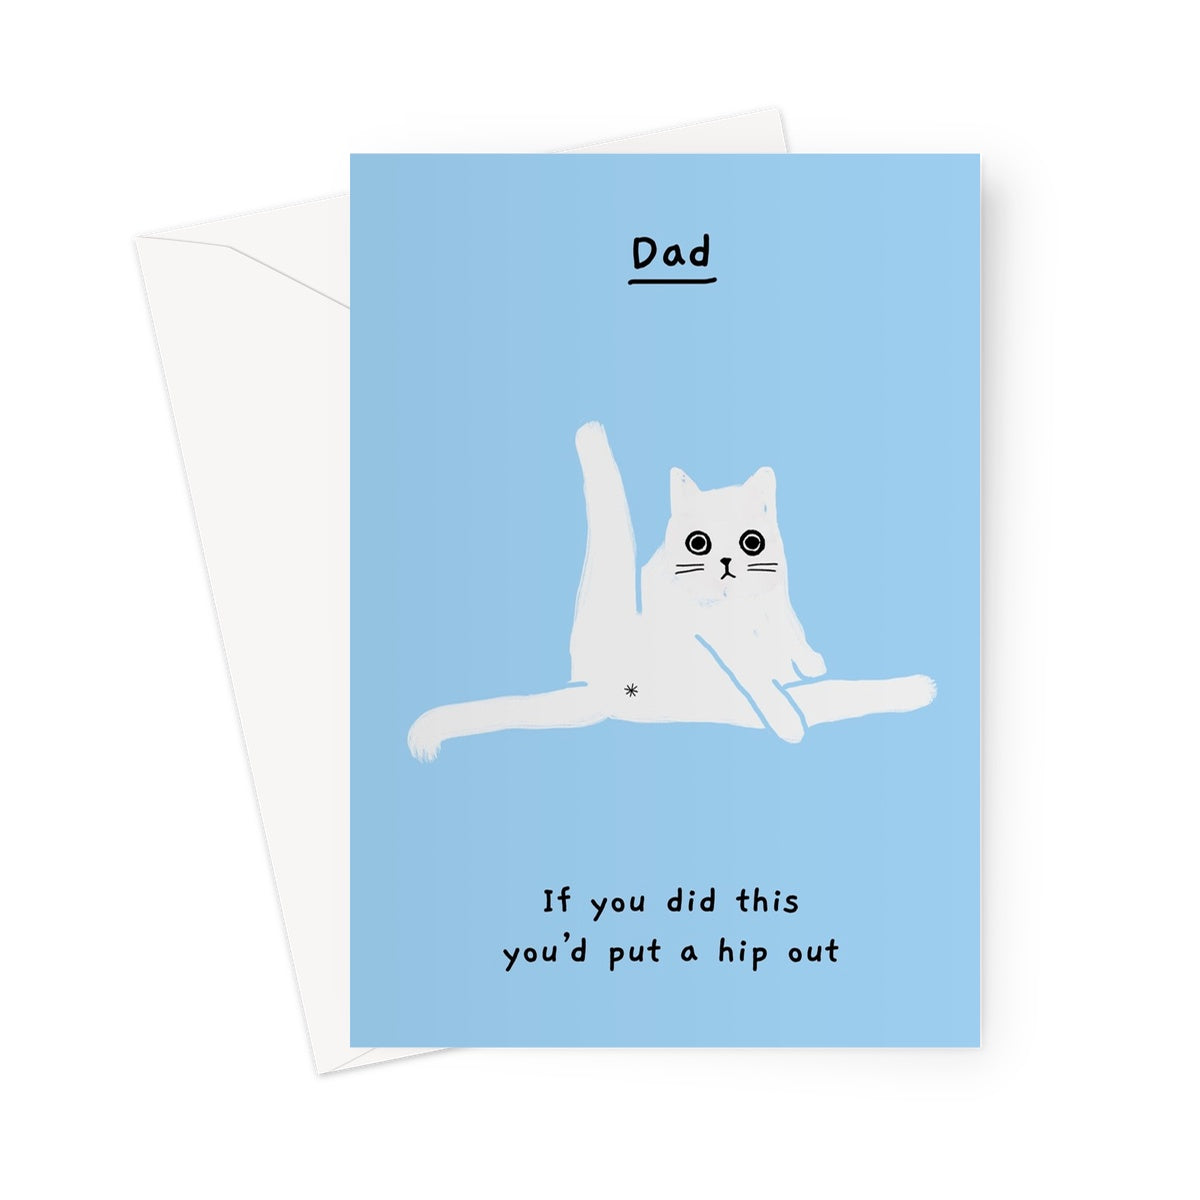 Ken the cat funny greeting card to Dad - if you did this you'd put a hip out in blue